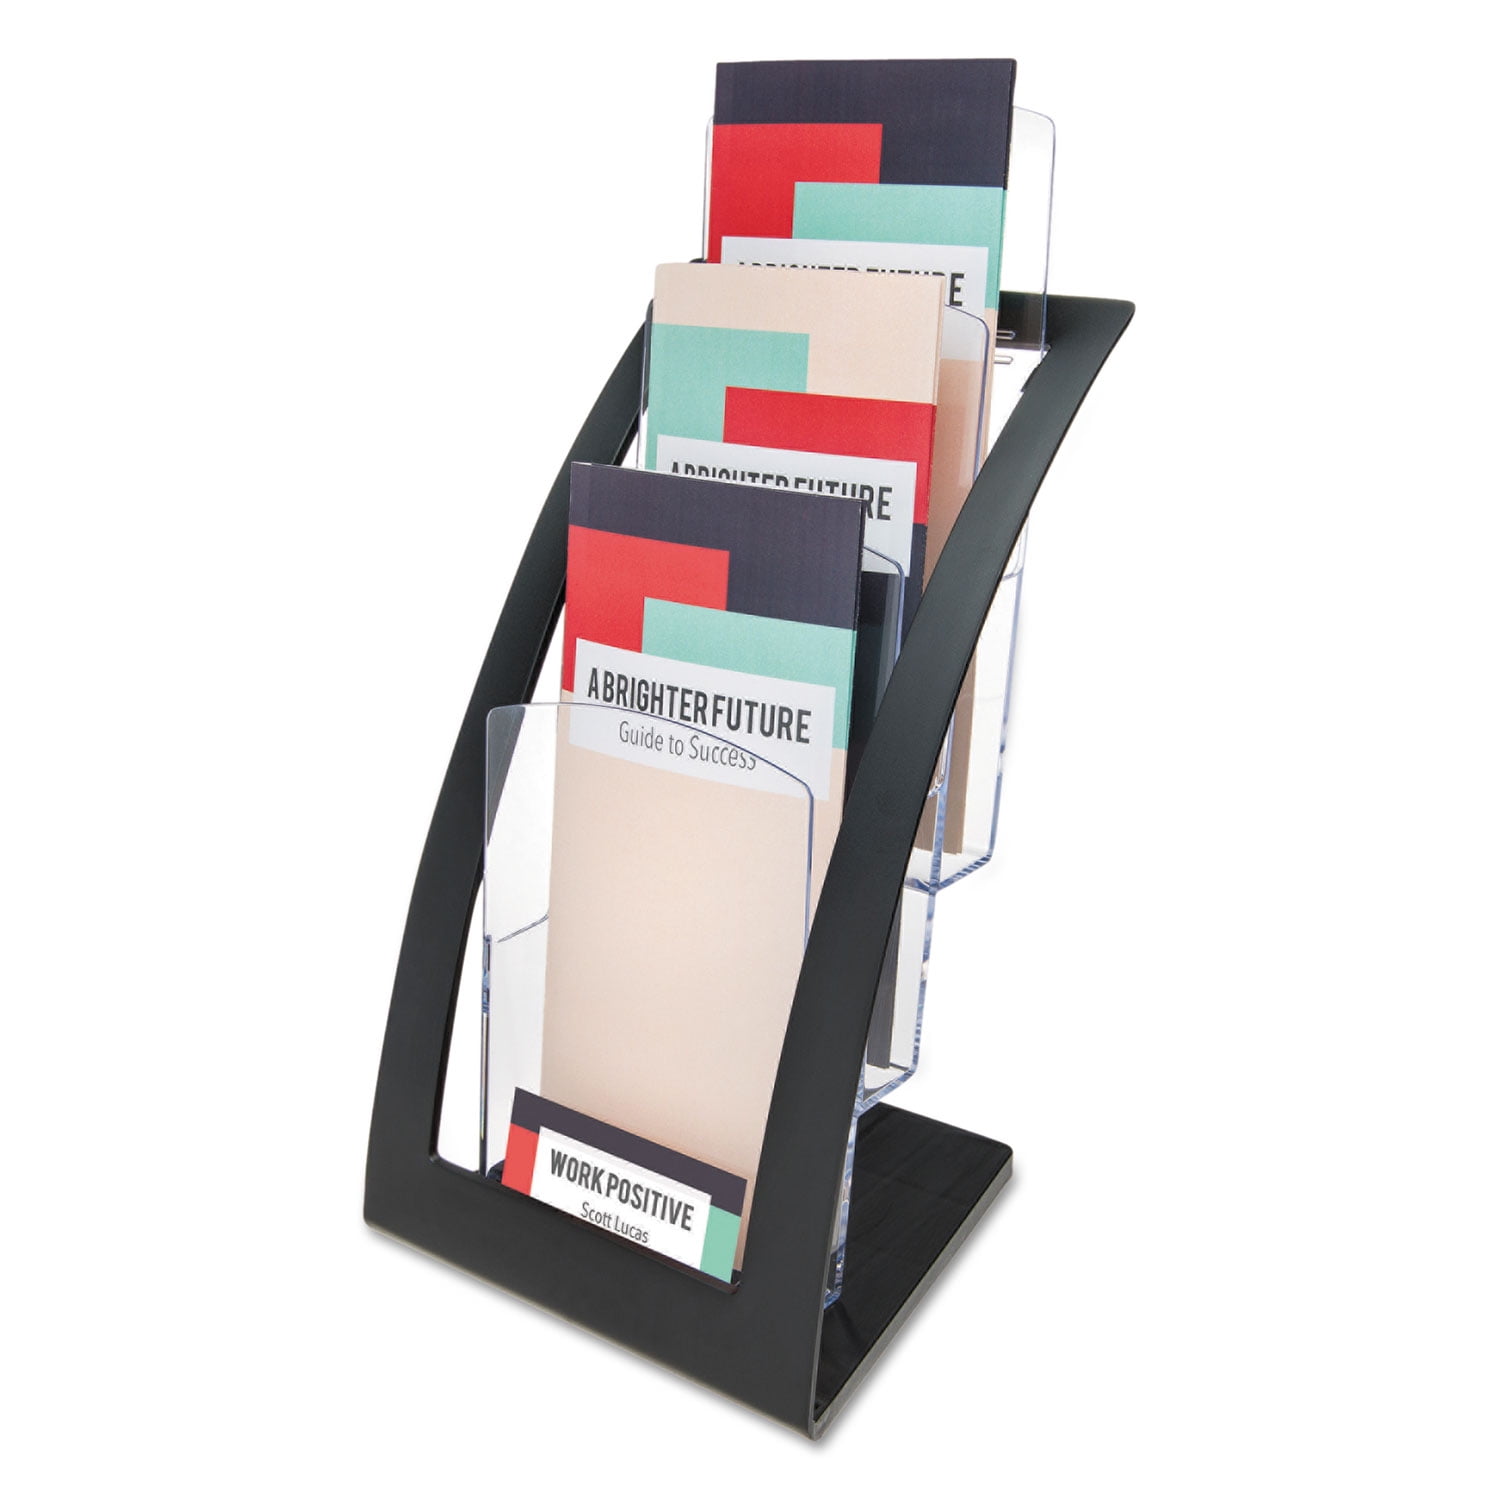 Leaflet Holder Wall mounted  literature dispenser brochure box pack 5 x A4 size 